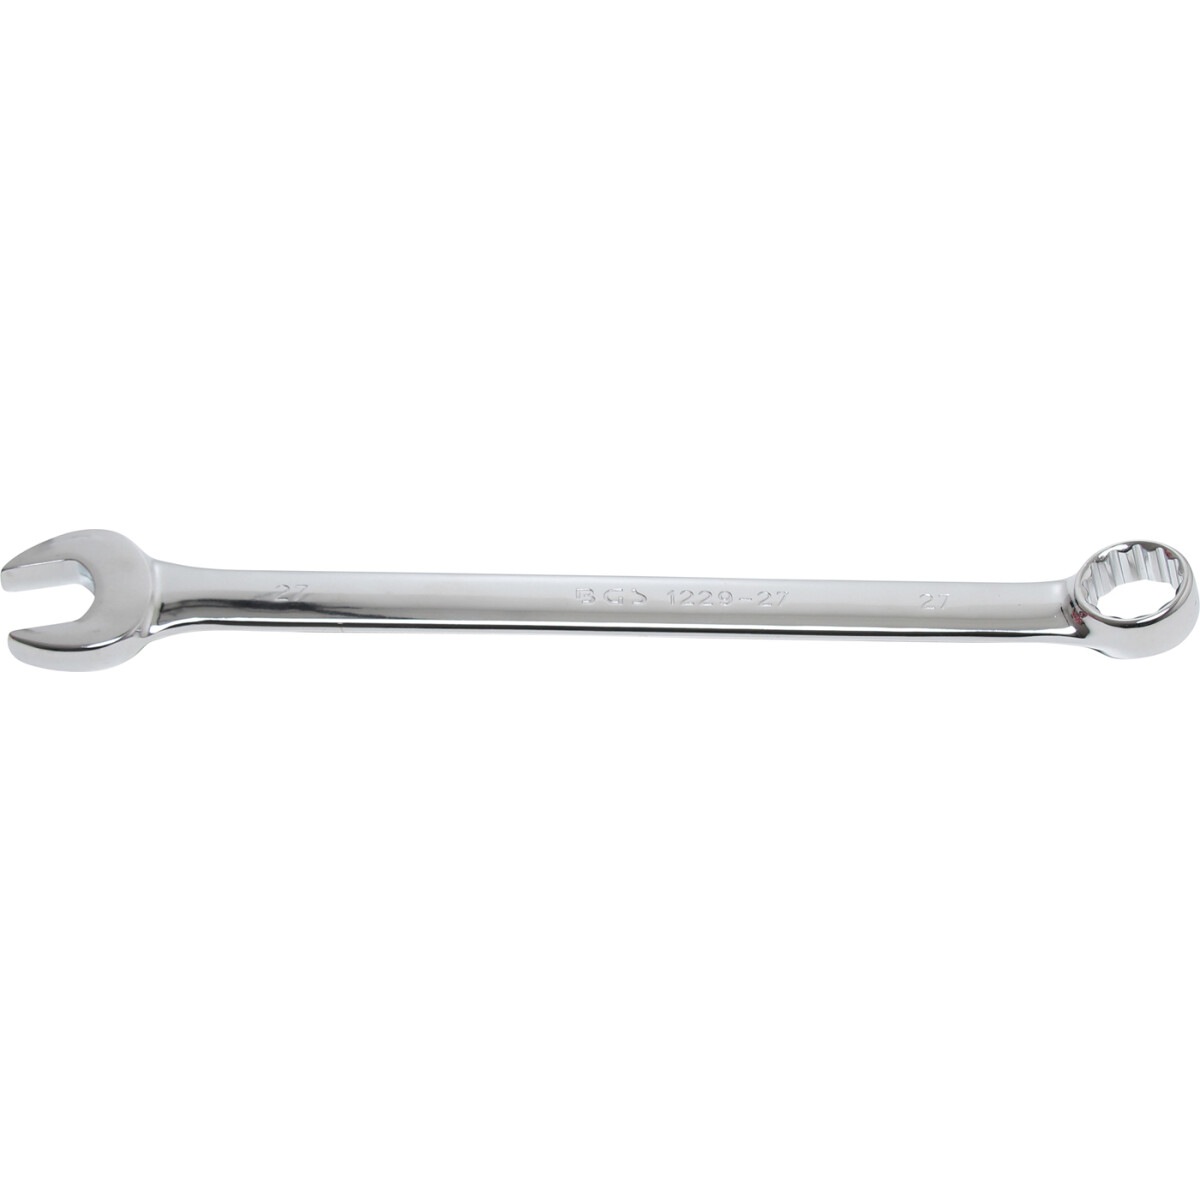 Combination Spanner BGS 1229-30 extra long 30 mm 